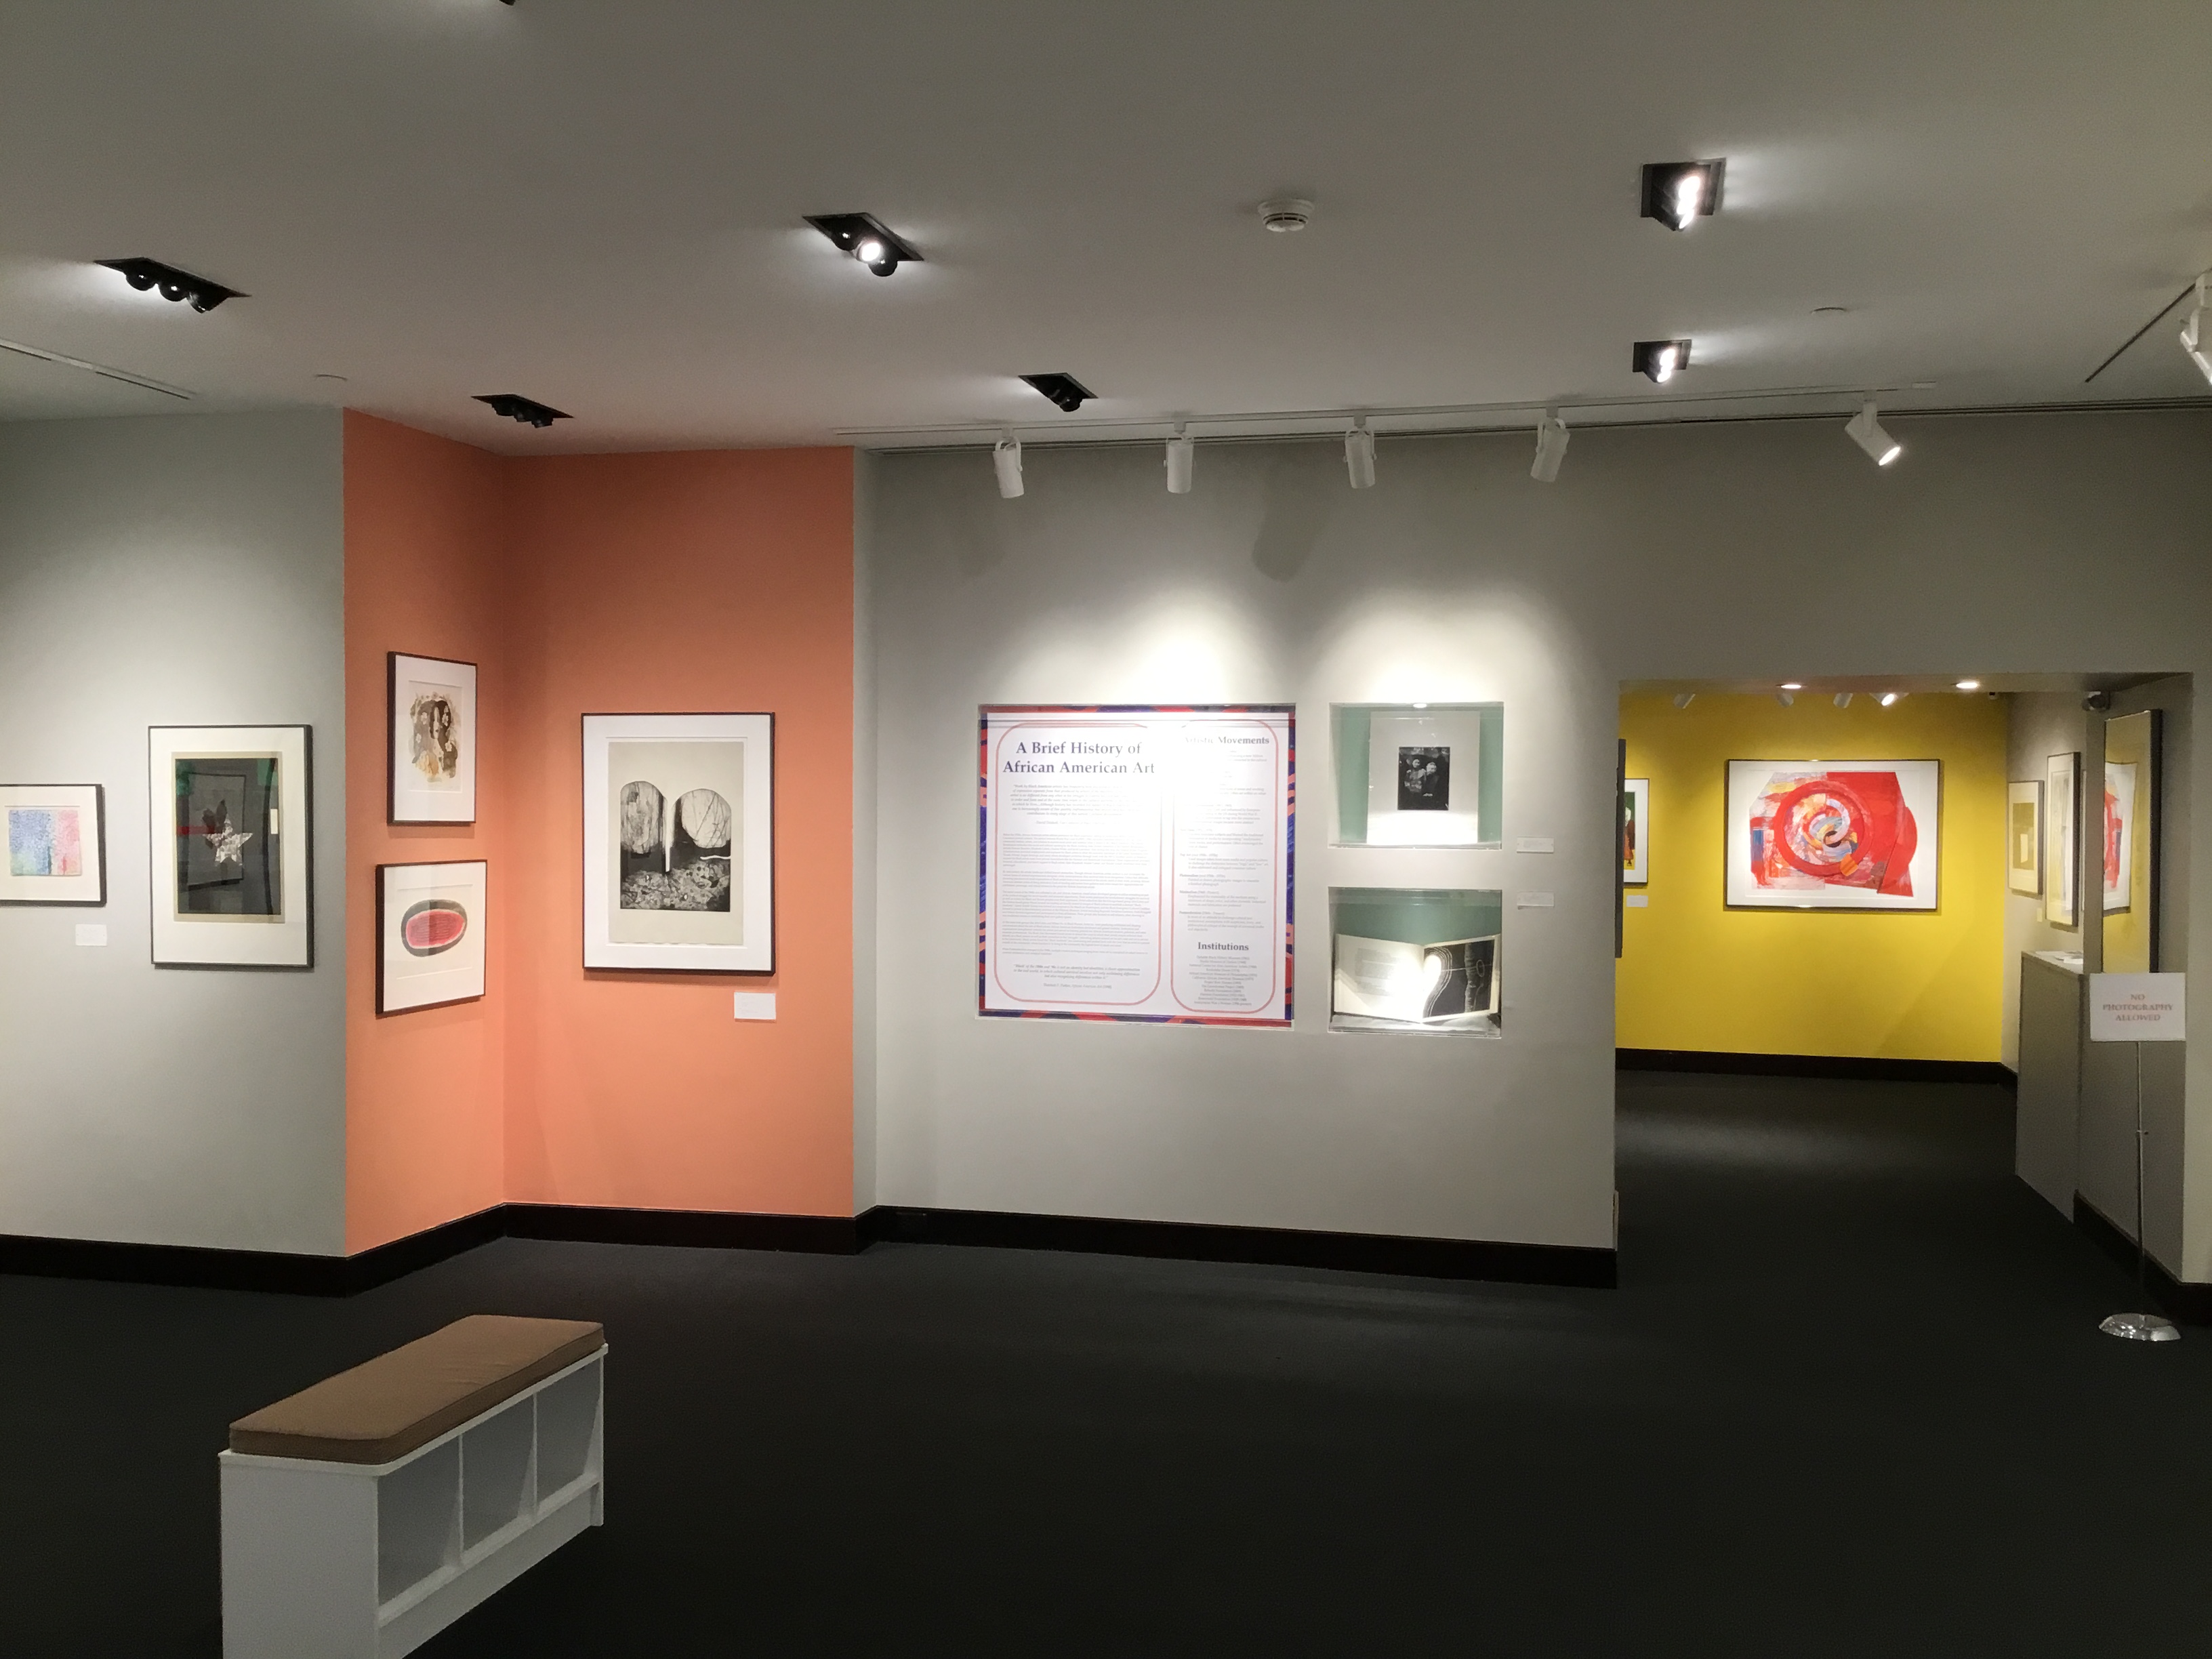 An image of the back wall of the main gallery with a large placard explaining the history of African American art, several pieces from the exhibit, and an entrance to the second room of the gallery.